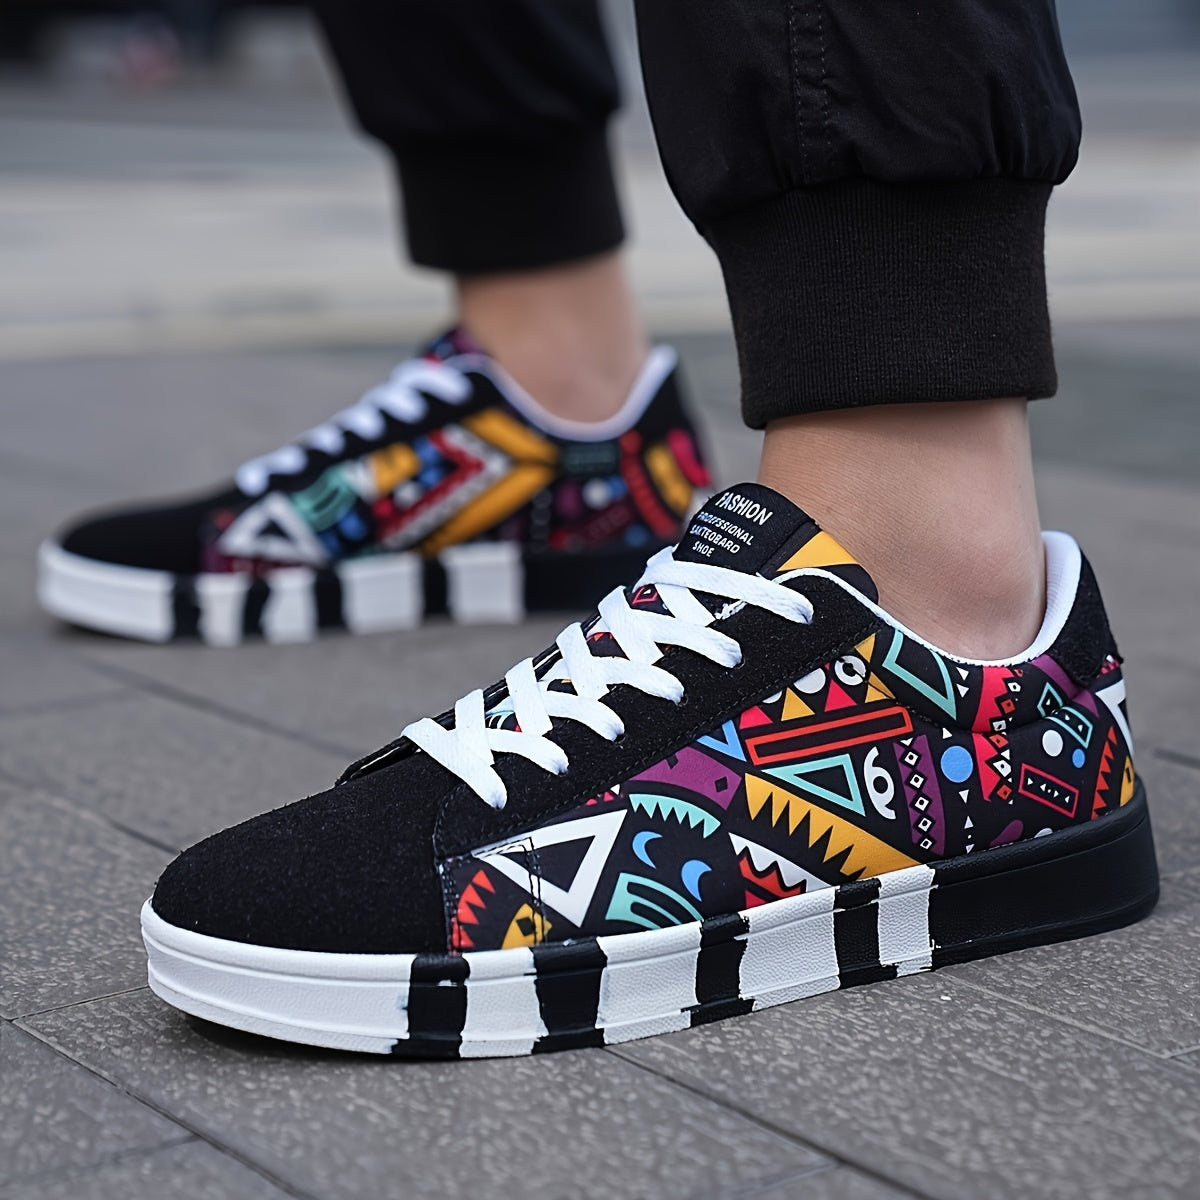 Men's Trendy Skate Shoes, Casual Style Sneakers